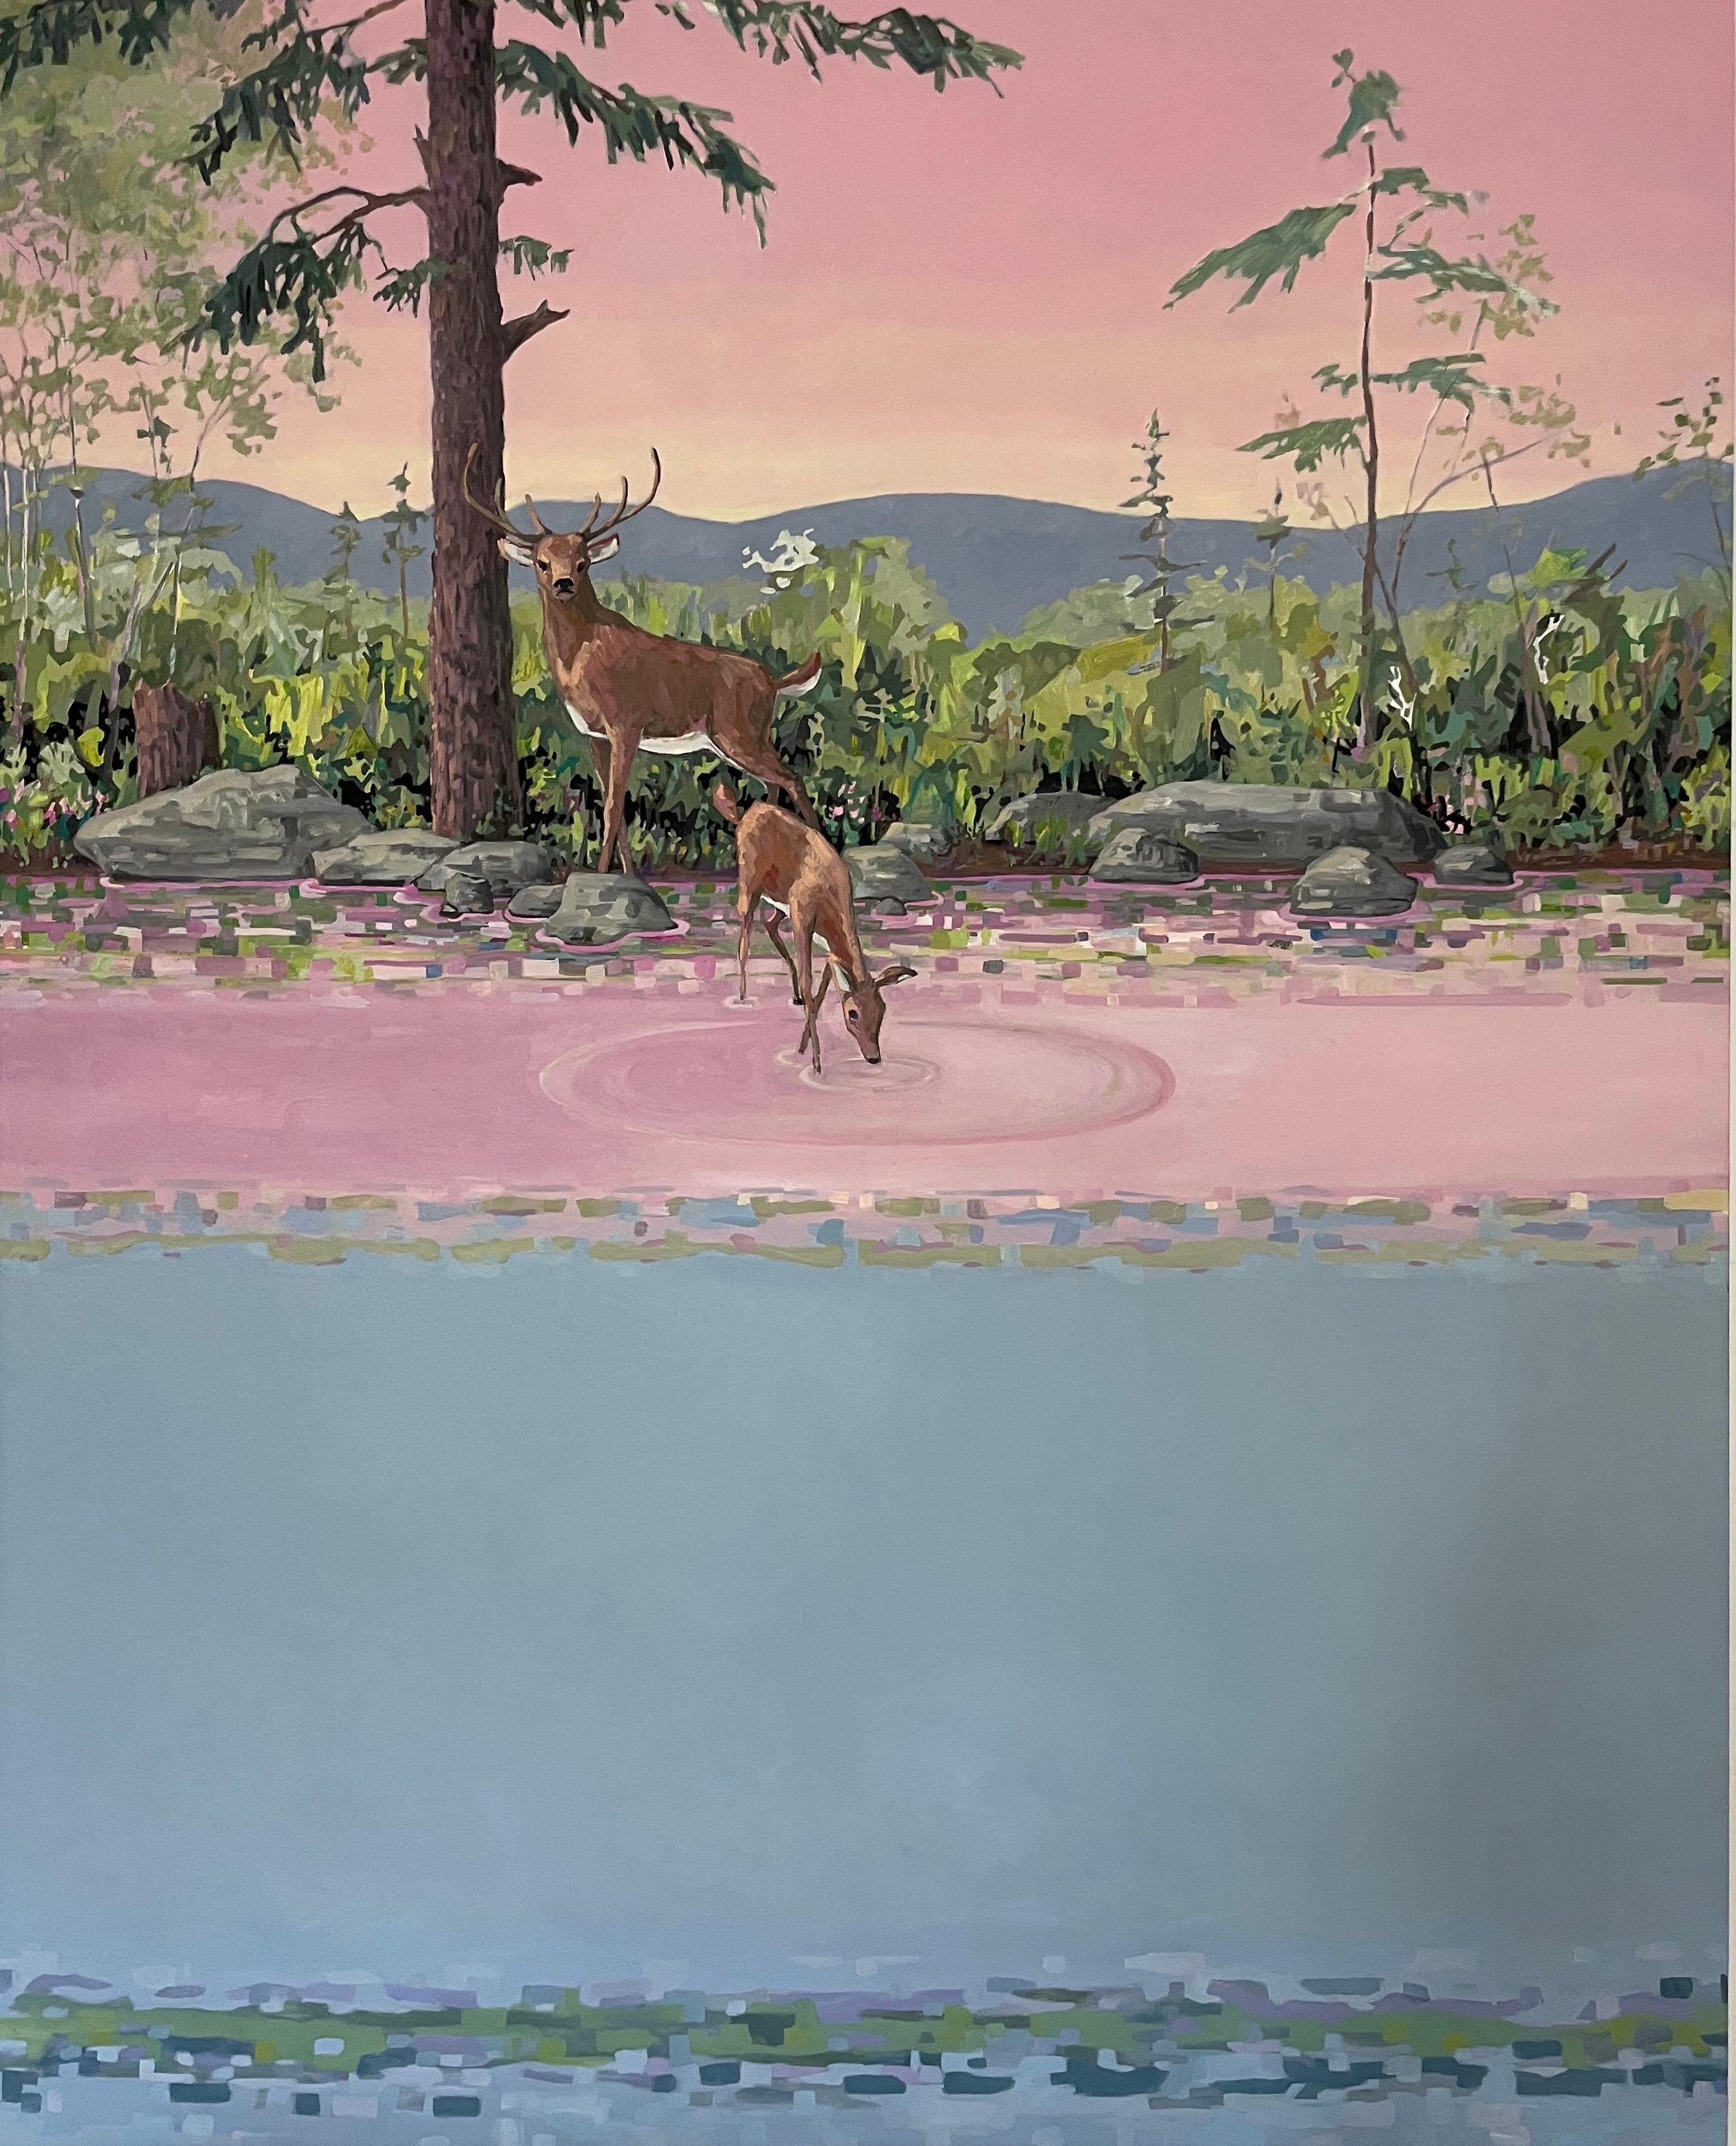 Pink Doe and Stag, Two Deer, Pink, Blue Water, Mountains, Lake, Pine Trees